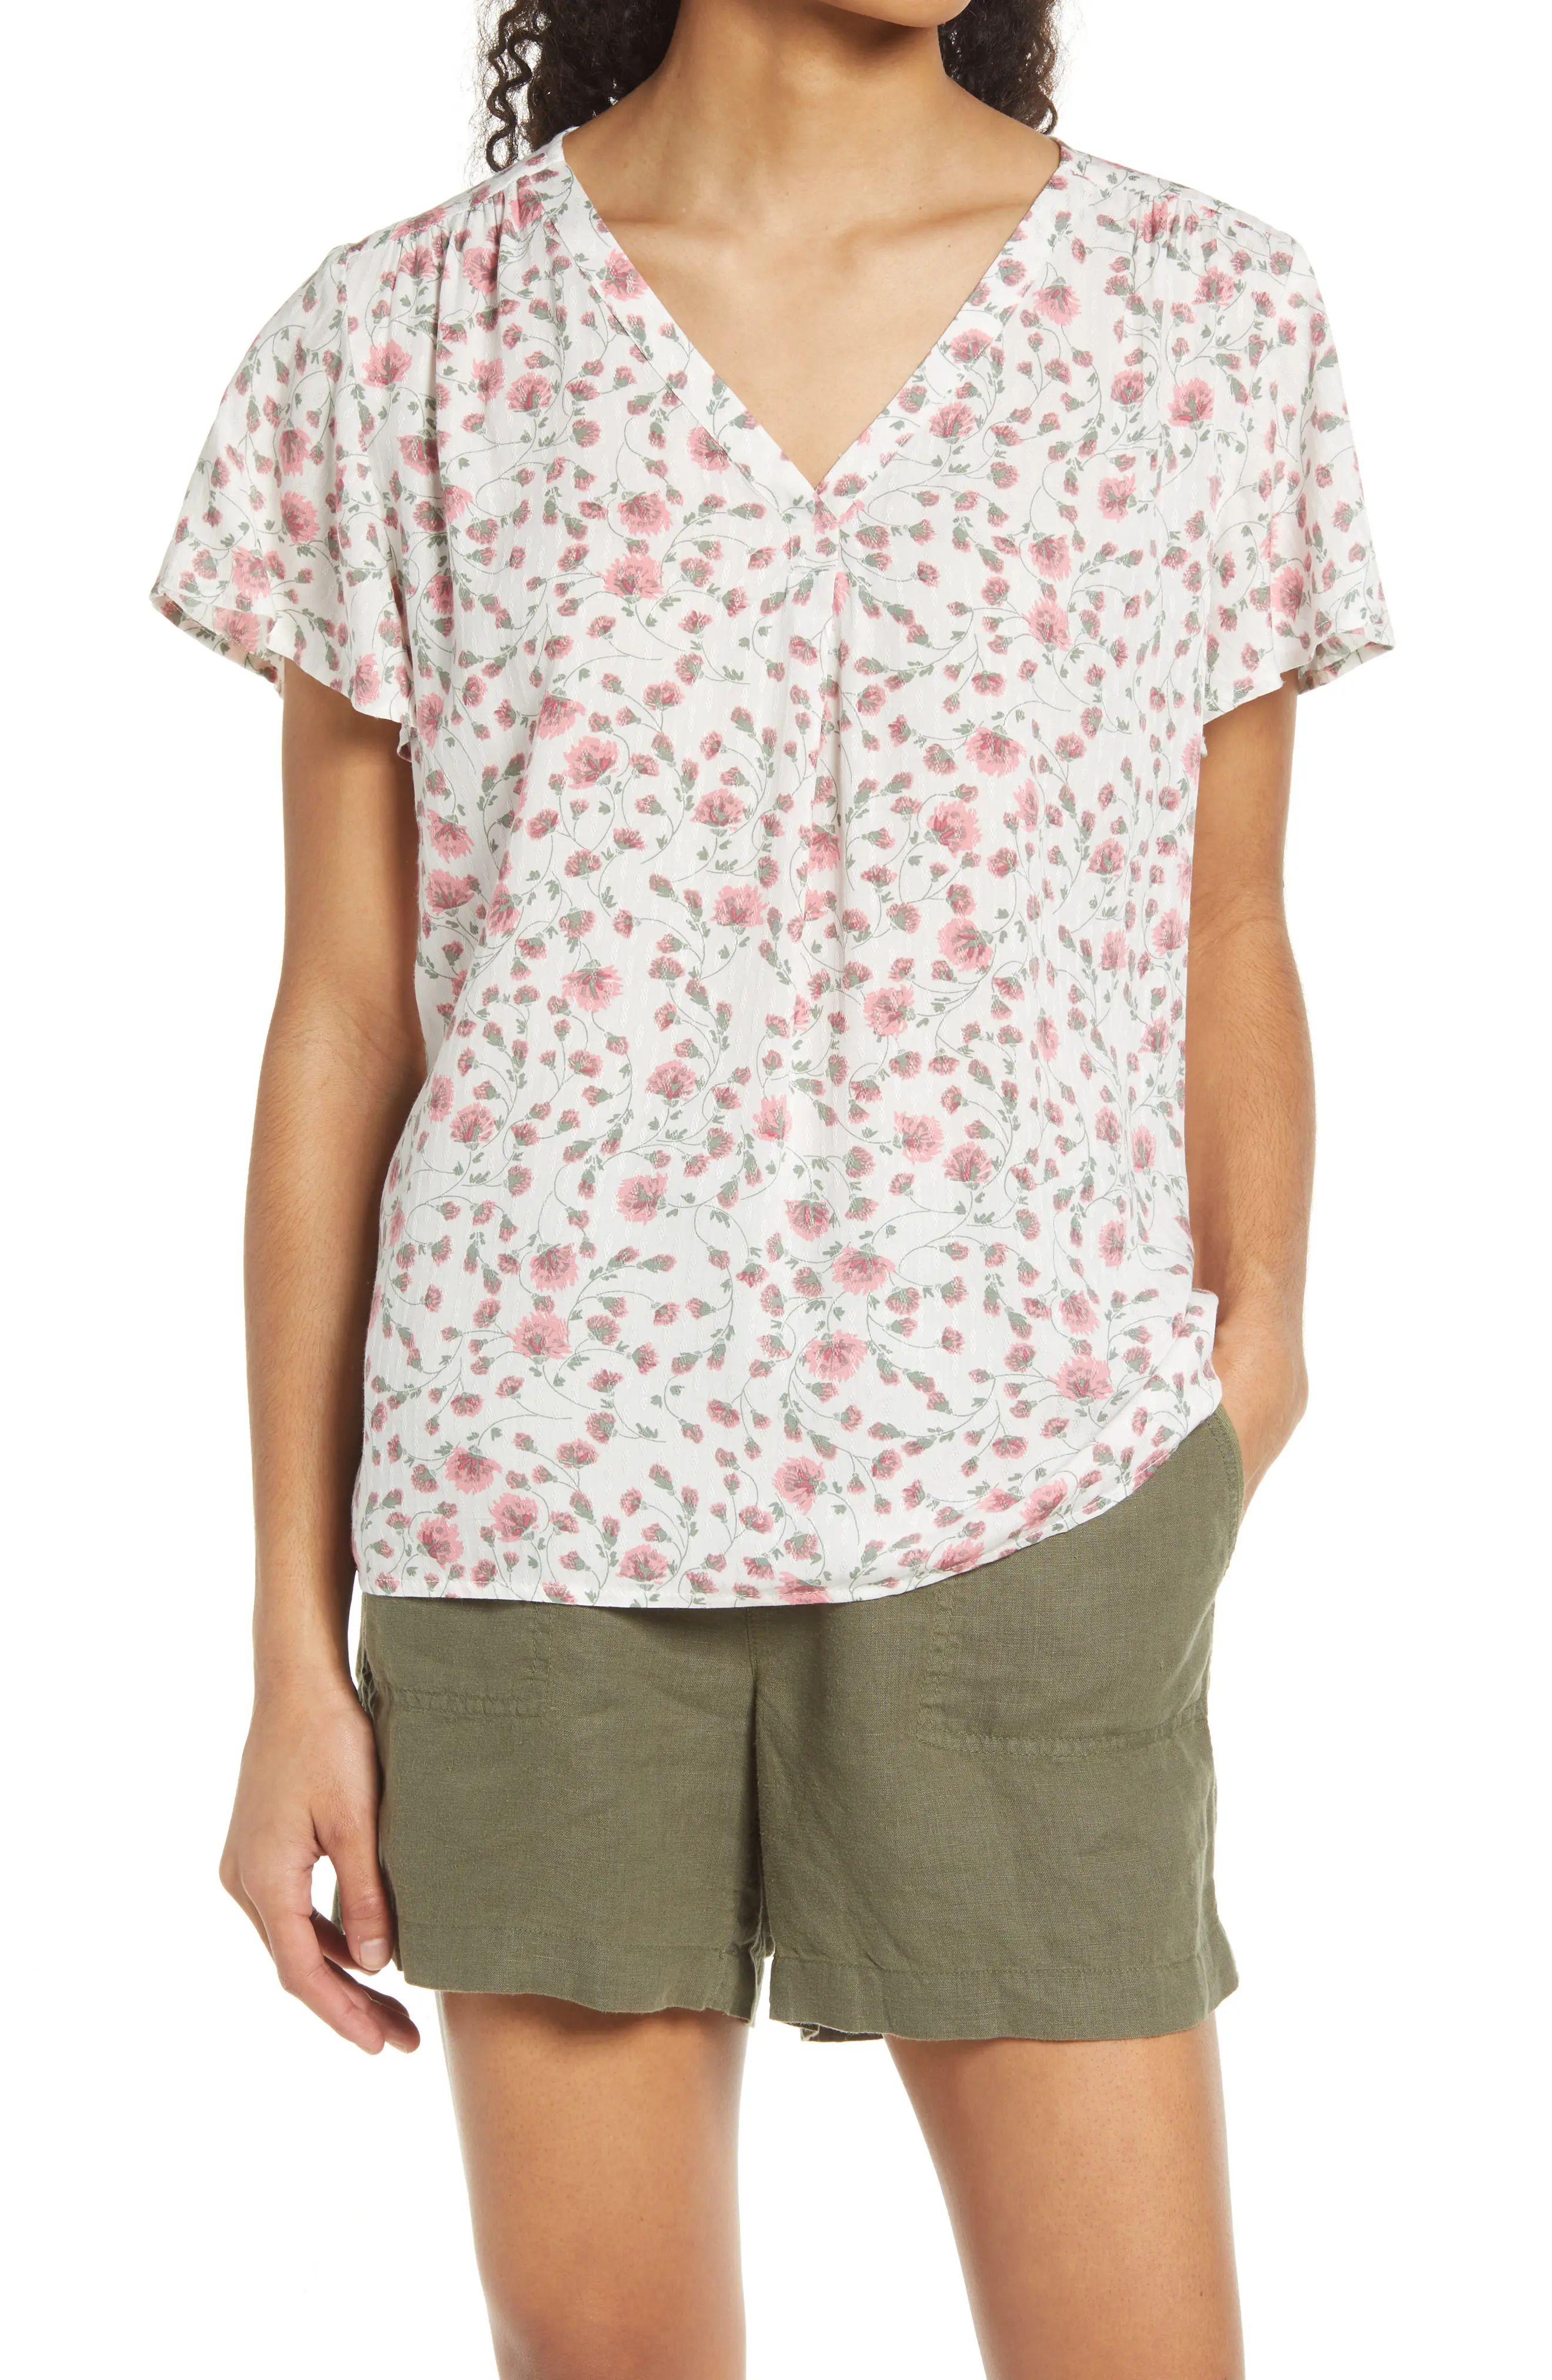 Caslon(R) Caslon? Dobby Flutter Sleeve Top in Ivory Pink Boudoir Floral at Nordstrom, Size Small | Nordstrom